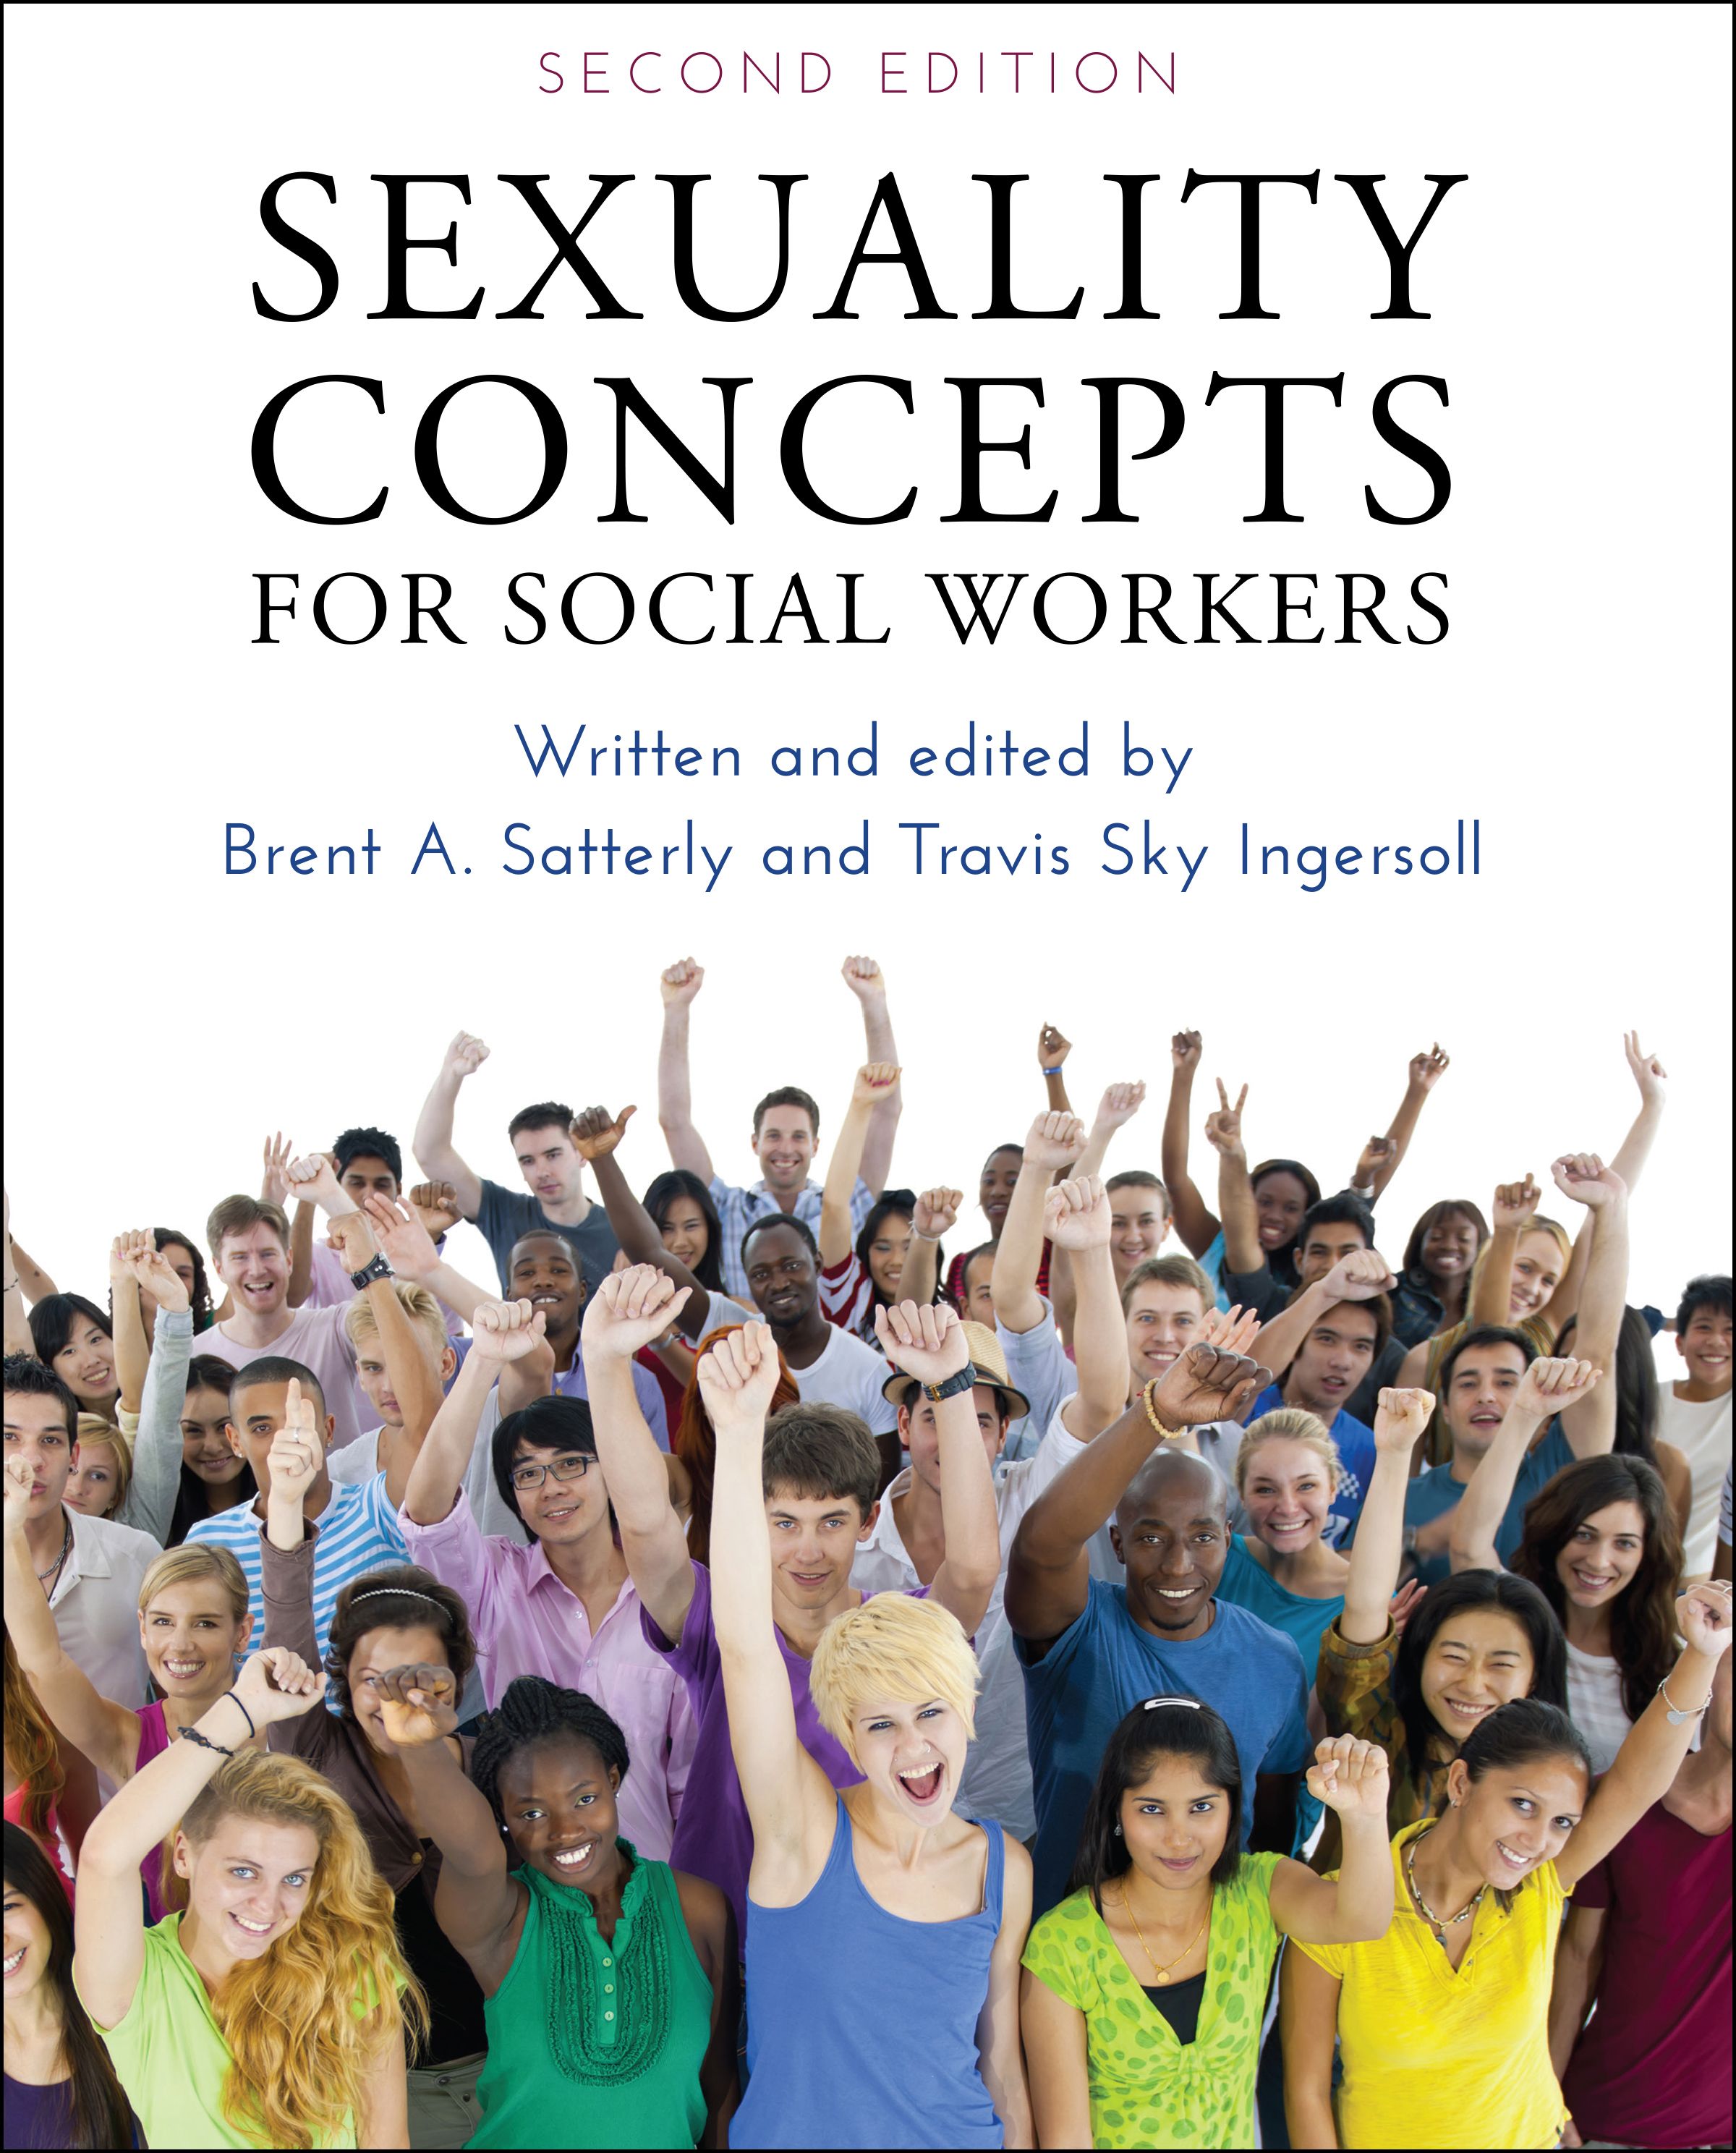 Image Sexuality concepts for social workers